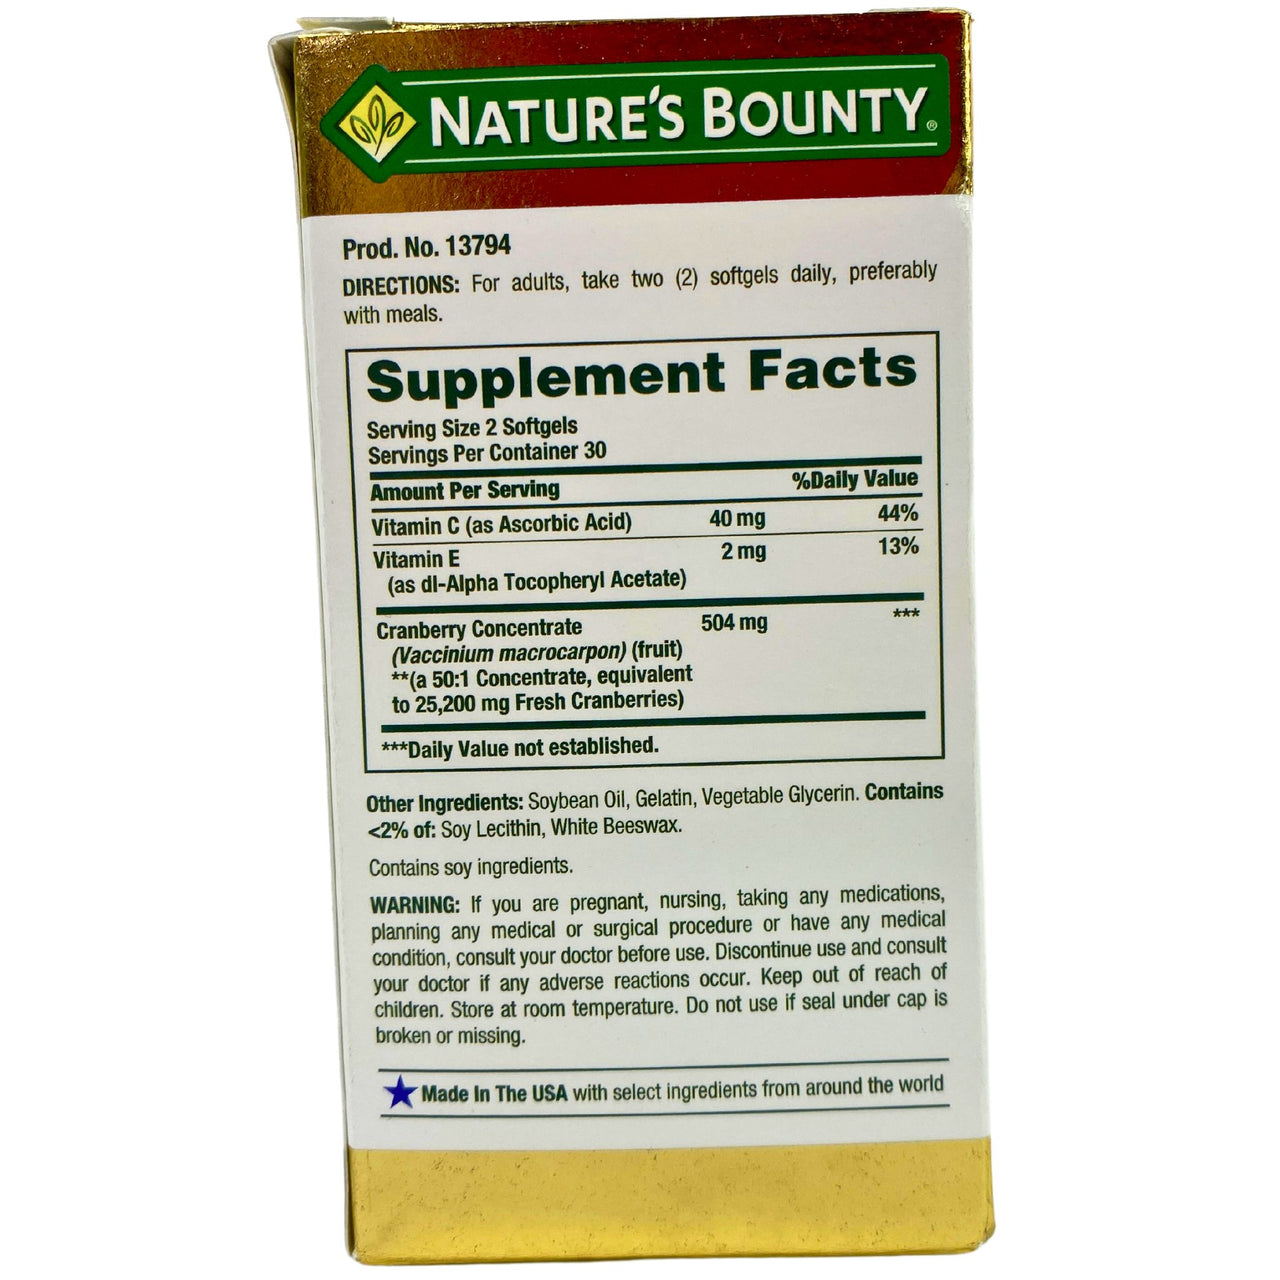 Nature's Bounty Cranberry Helps Mantain a Healthy Urinary Tract 200mg